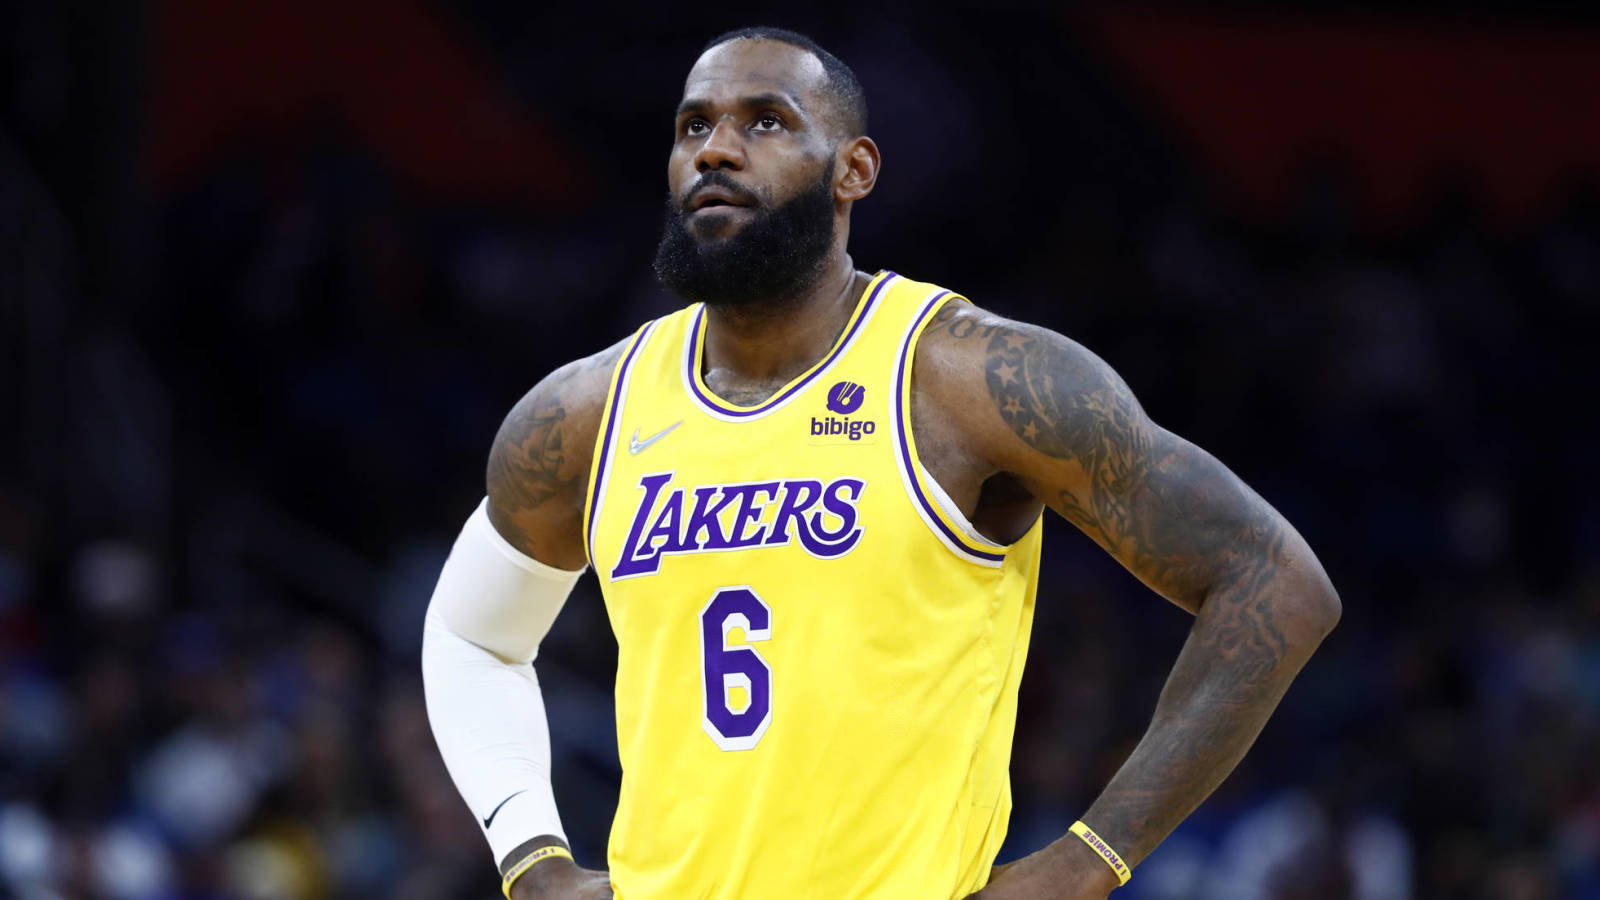 Lakers star LeBron James out Wednesday, could miss more time with knee injury